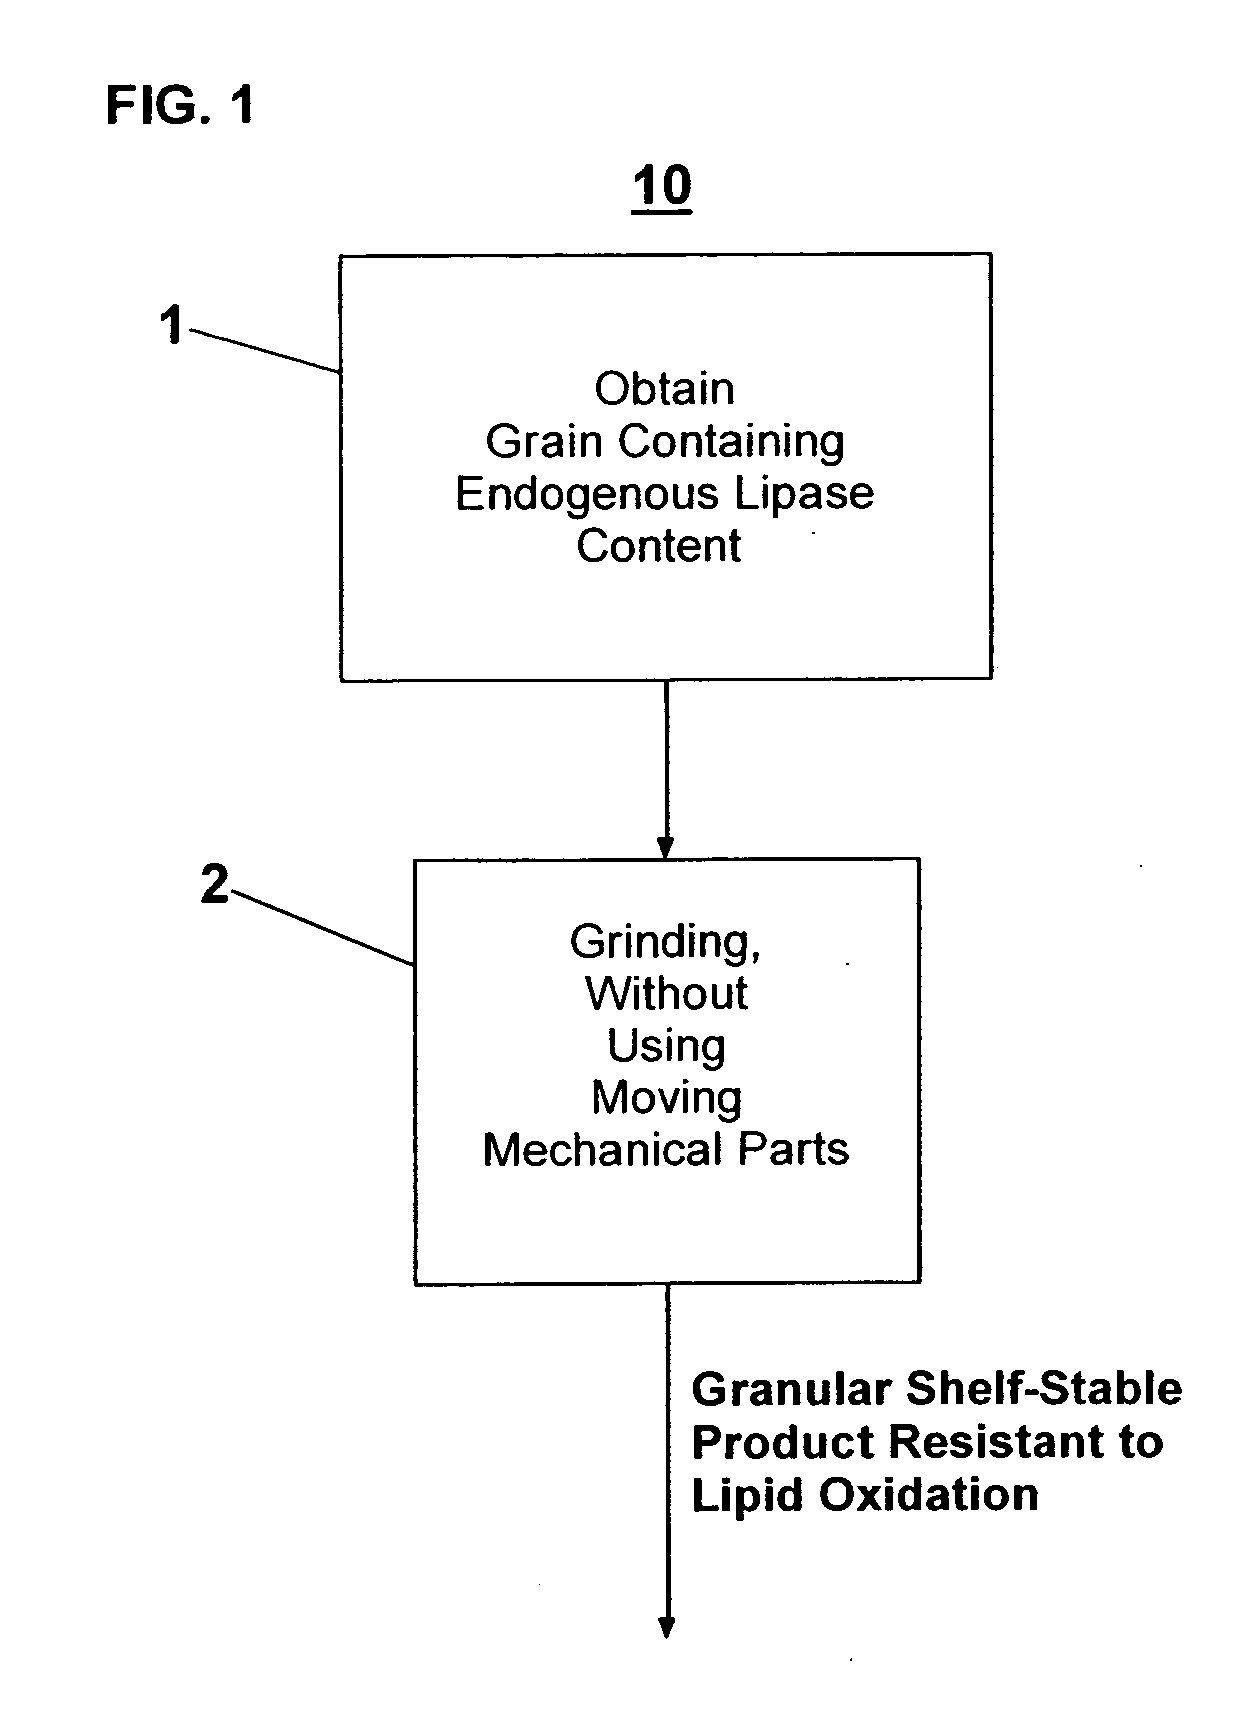 Process for granulation of edible seeds